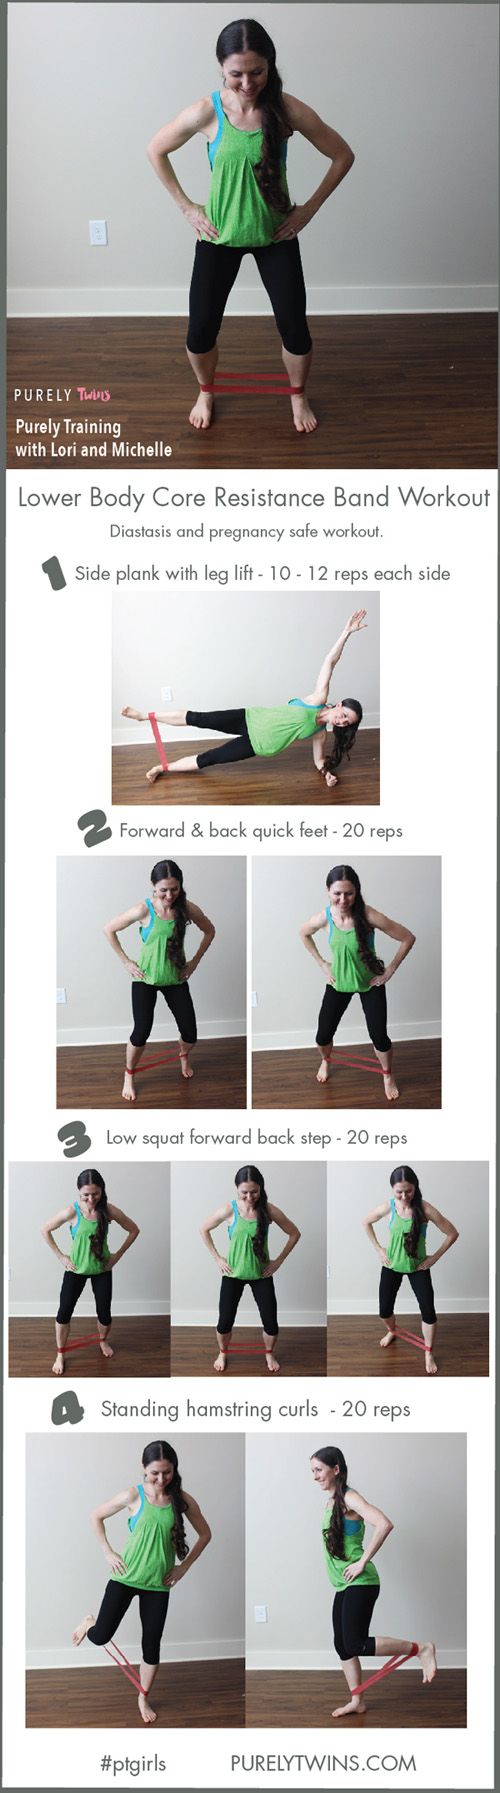 Resistance band workout to get a tight core and sexy legs for women and moms! Little space required. You don't need to lift super heavy to get a great leg workout in at home. Follow these 4 exercises to strengthen and tone your lower body and core. Share this workout with your friends and do this workout with me.